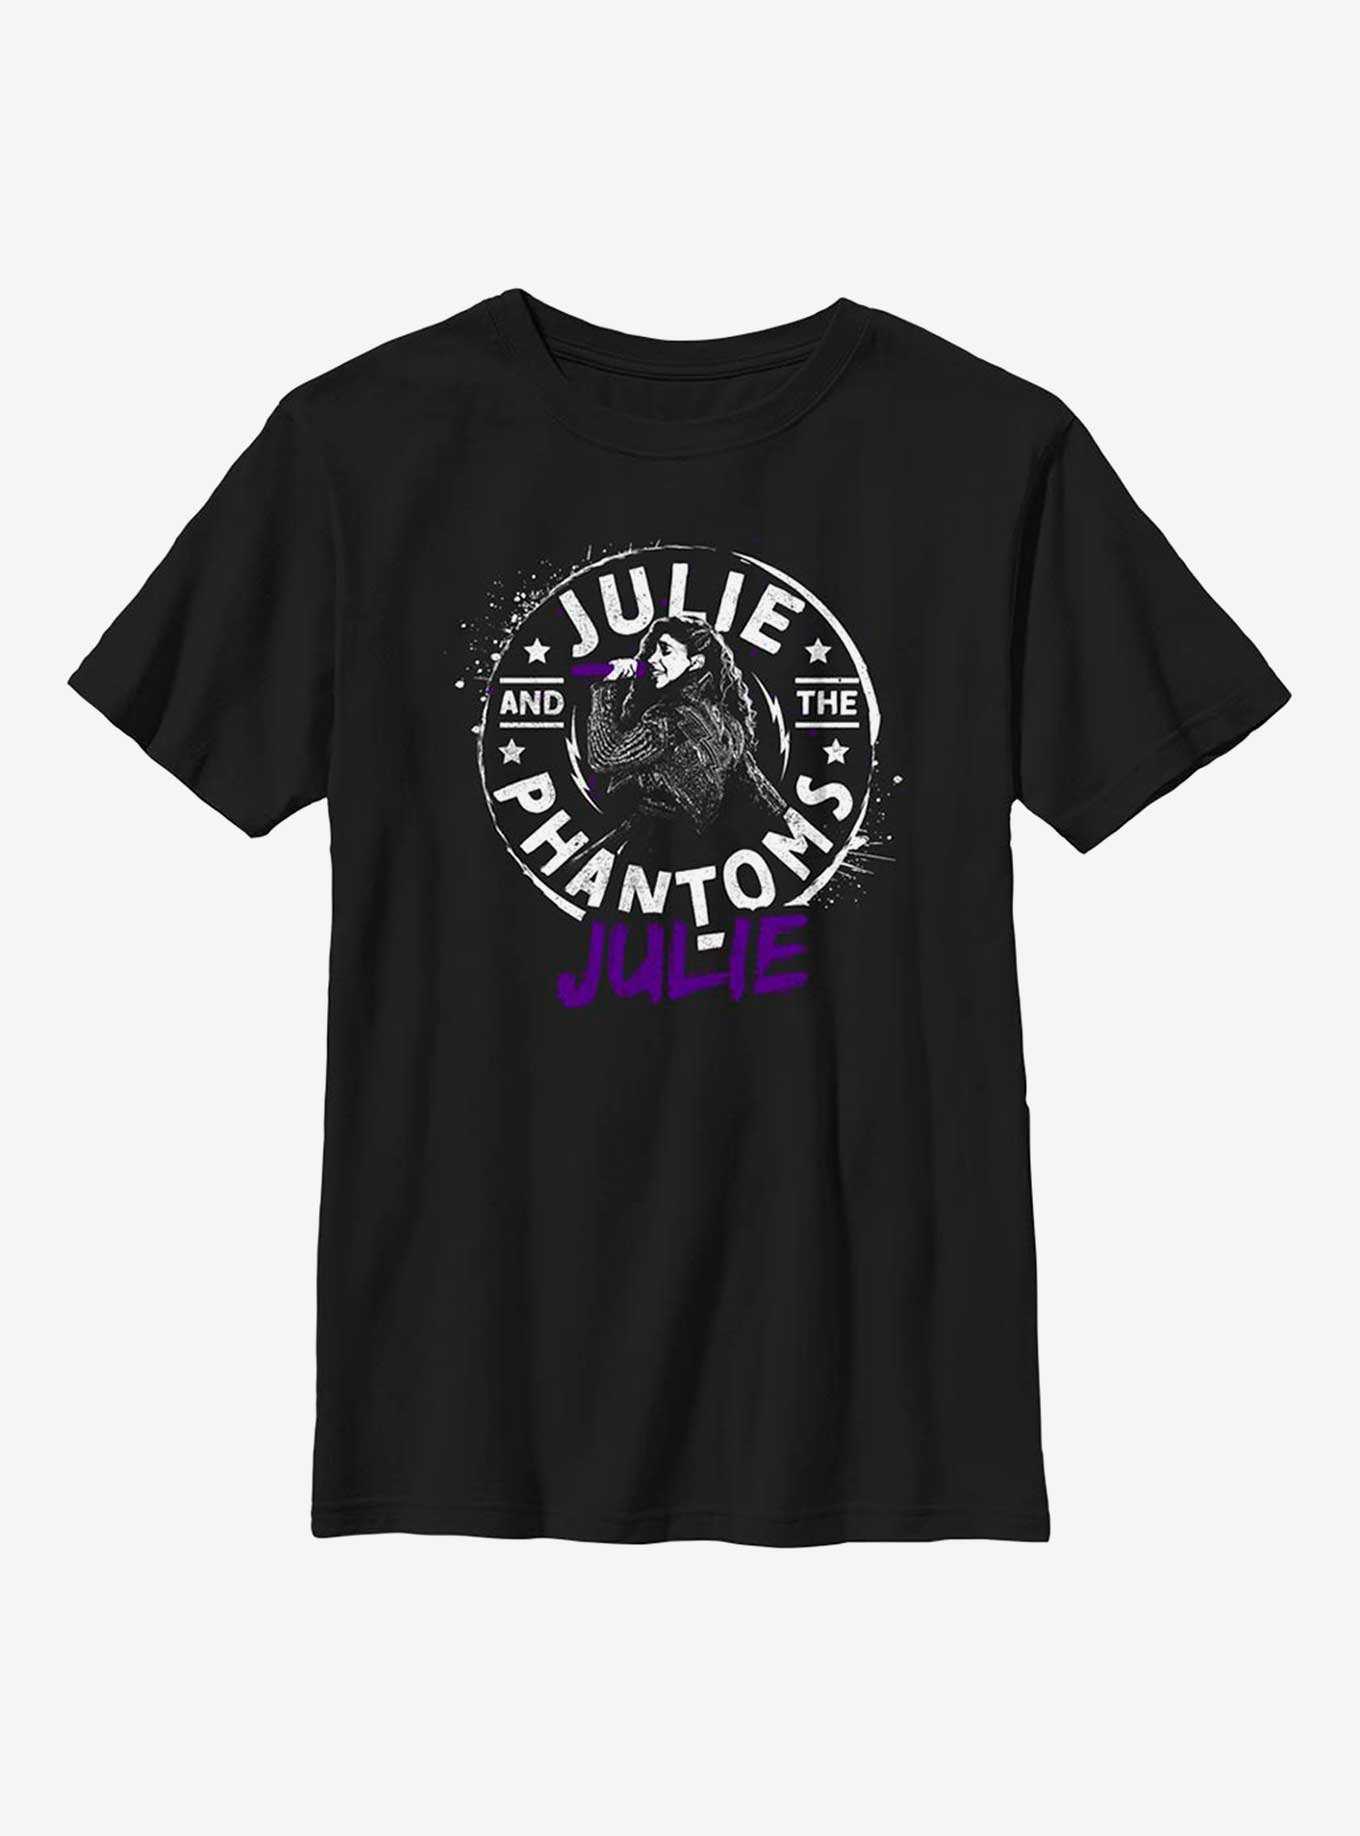 Julie And The Phantoms Grunge Youth T-Shirt, , hi-res